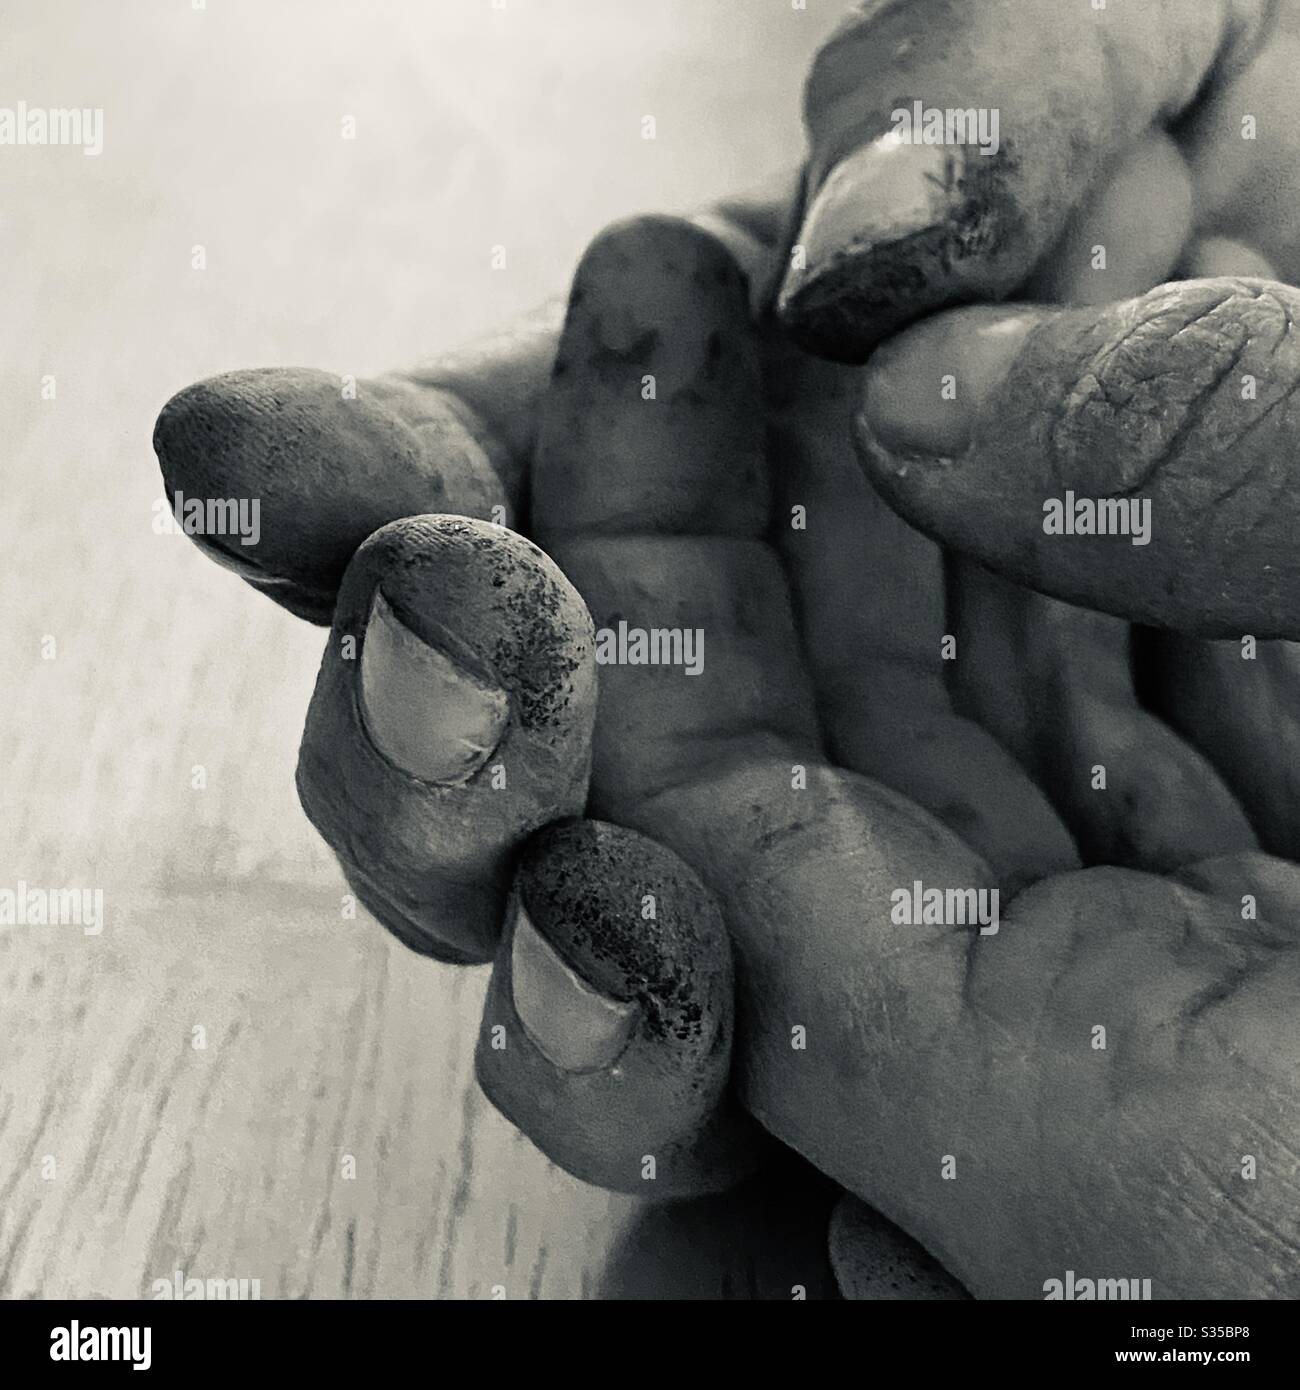 A black and white image of a females dirty hands after gardening, clasped and resting on a table. Stock Photo